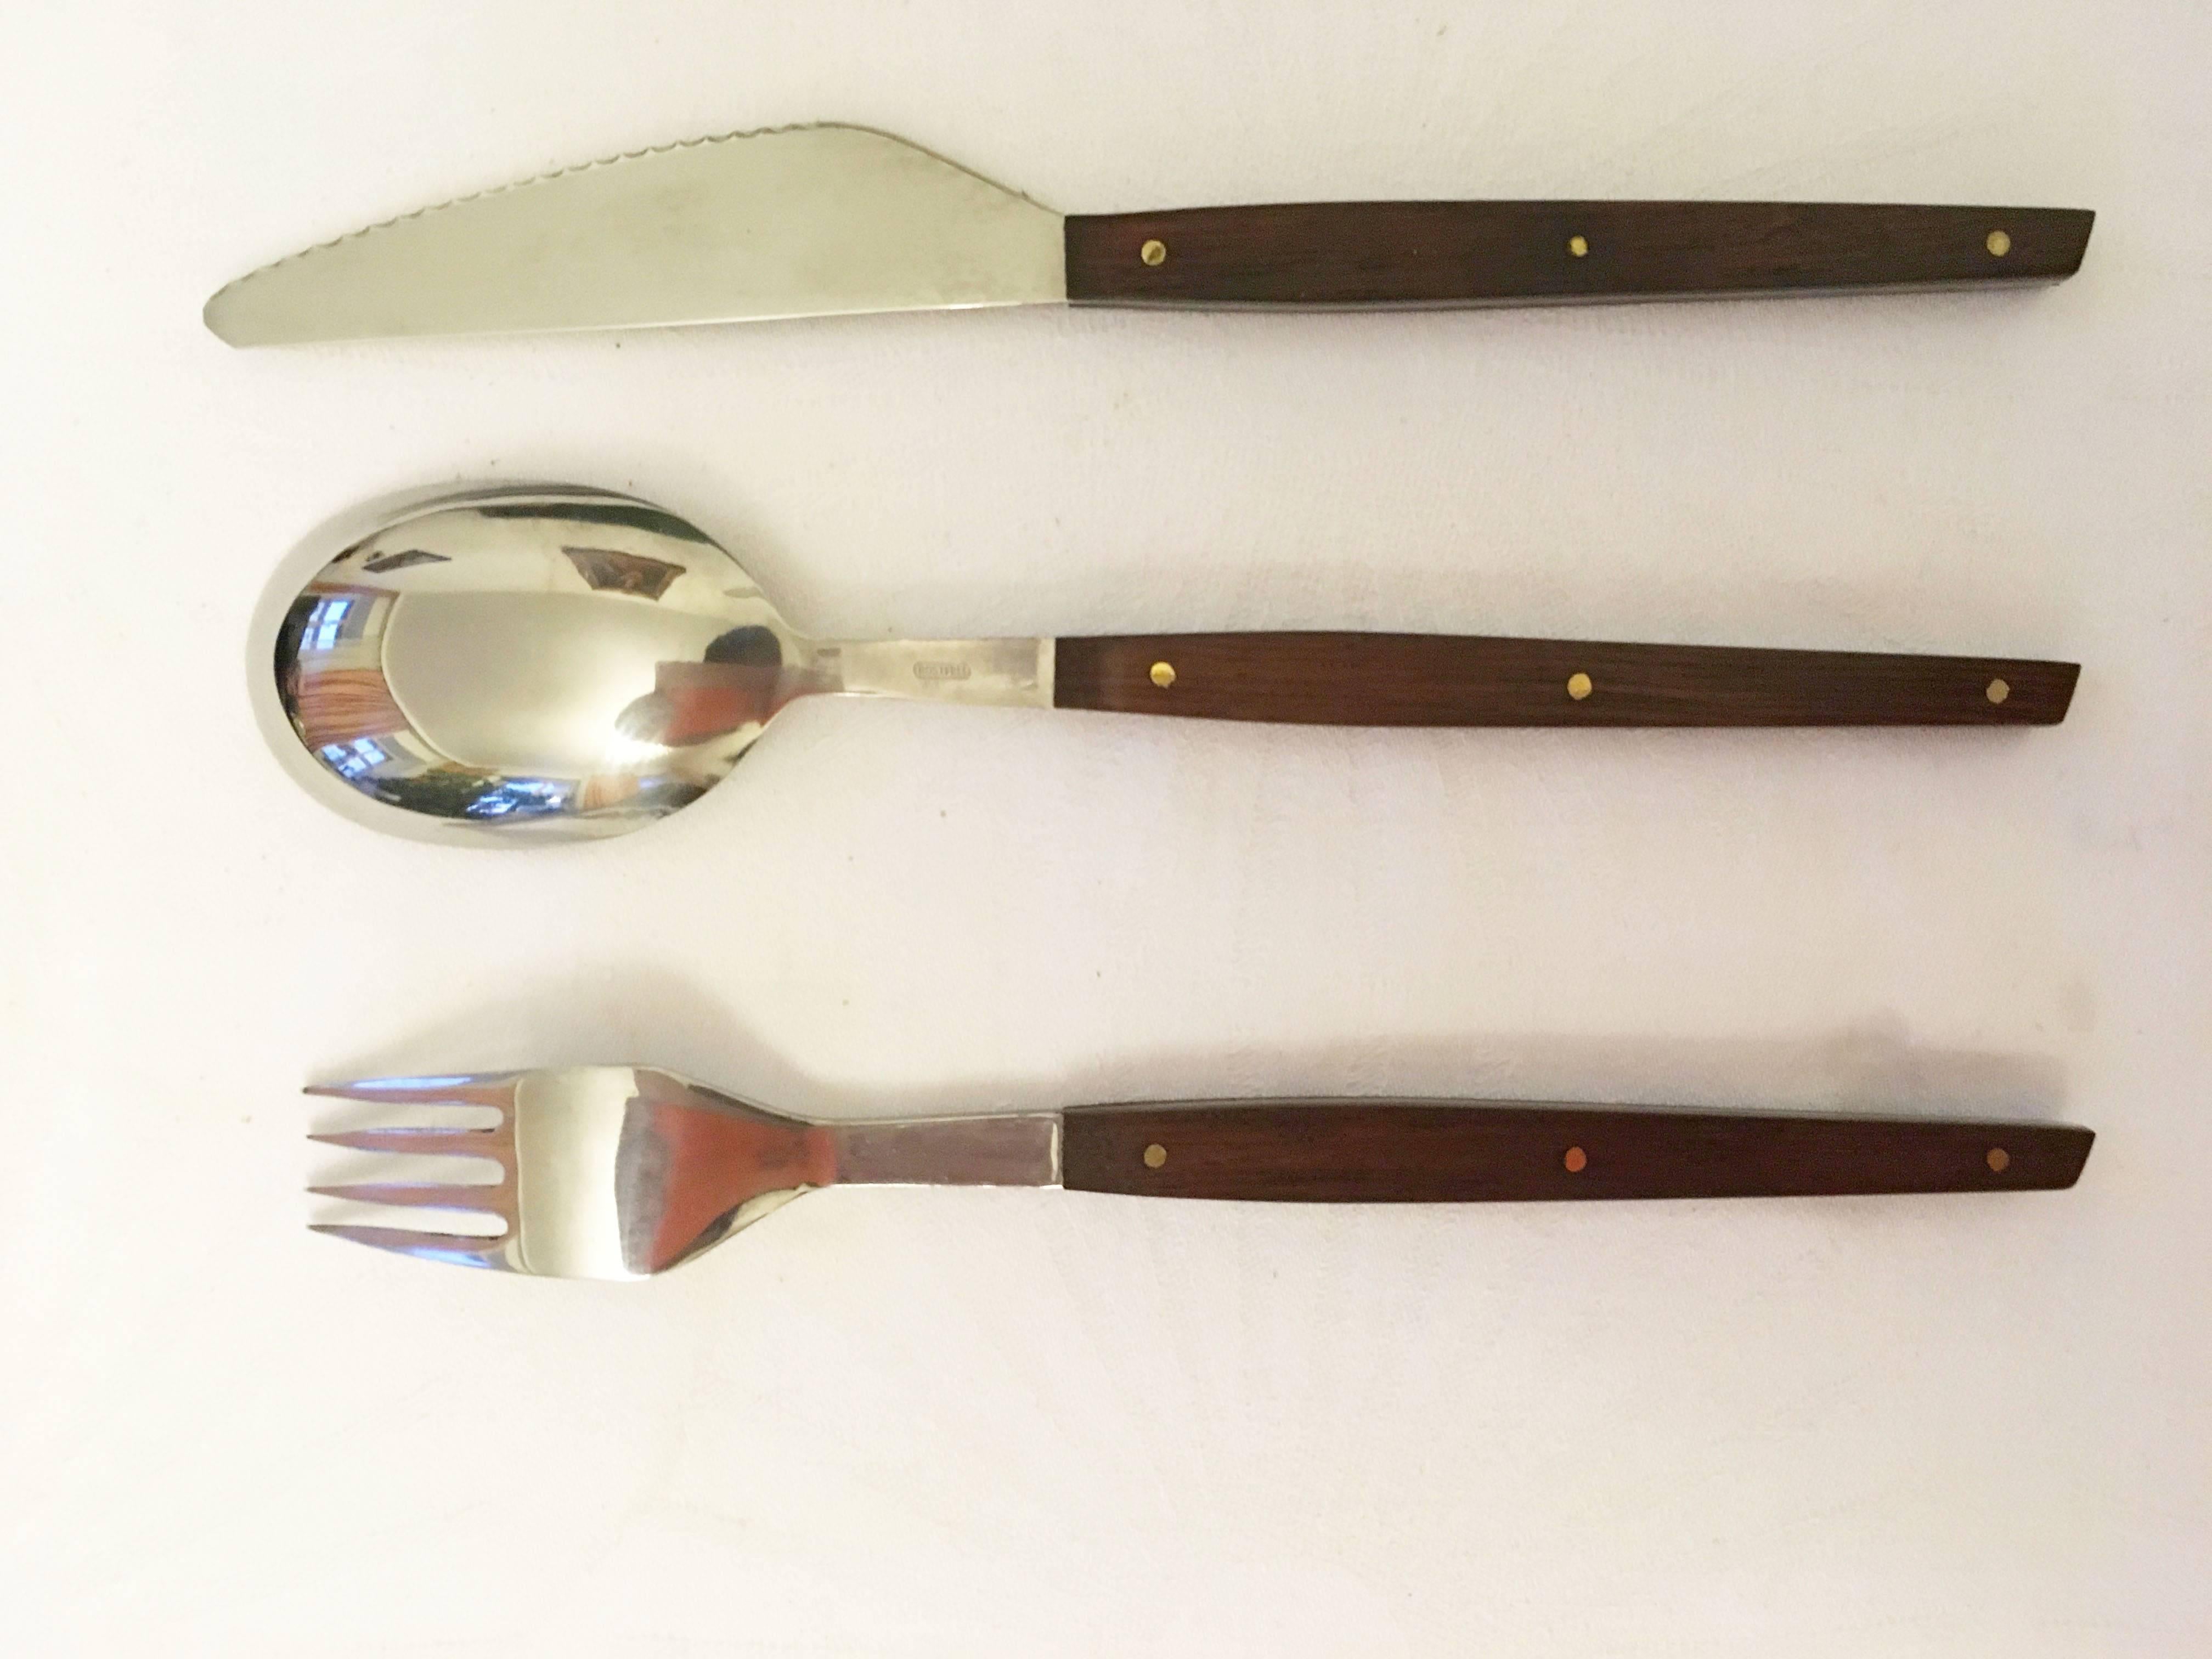 Made by Alois Weichselbaumer company later Amboss in the 1950s.
Model 3000 stainless steel with rosewood handle with brass rivets.
Set of 18:
Six knives,
six spoons,
six forks.
Almost mint condition.